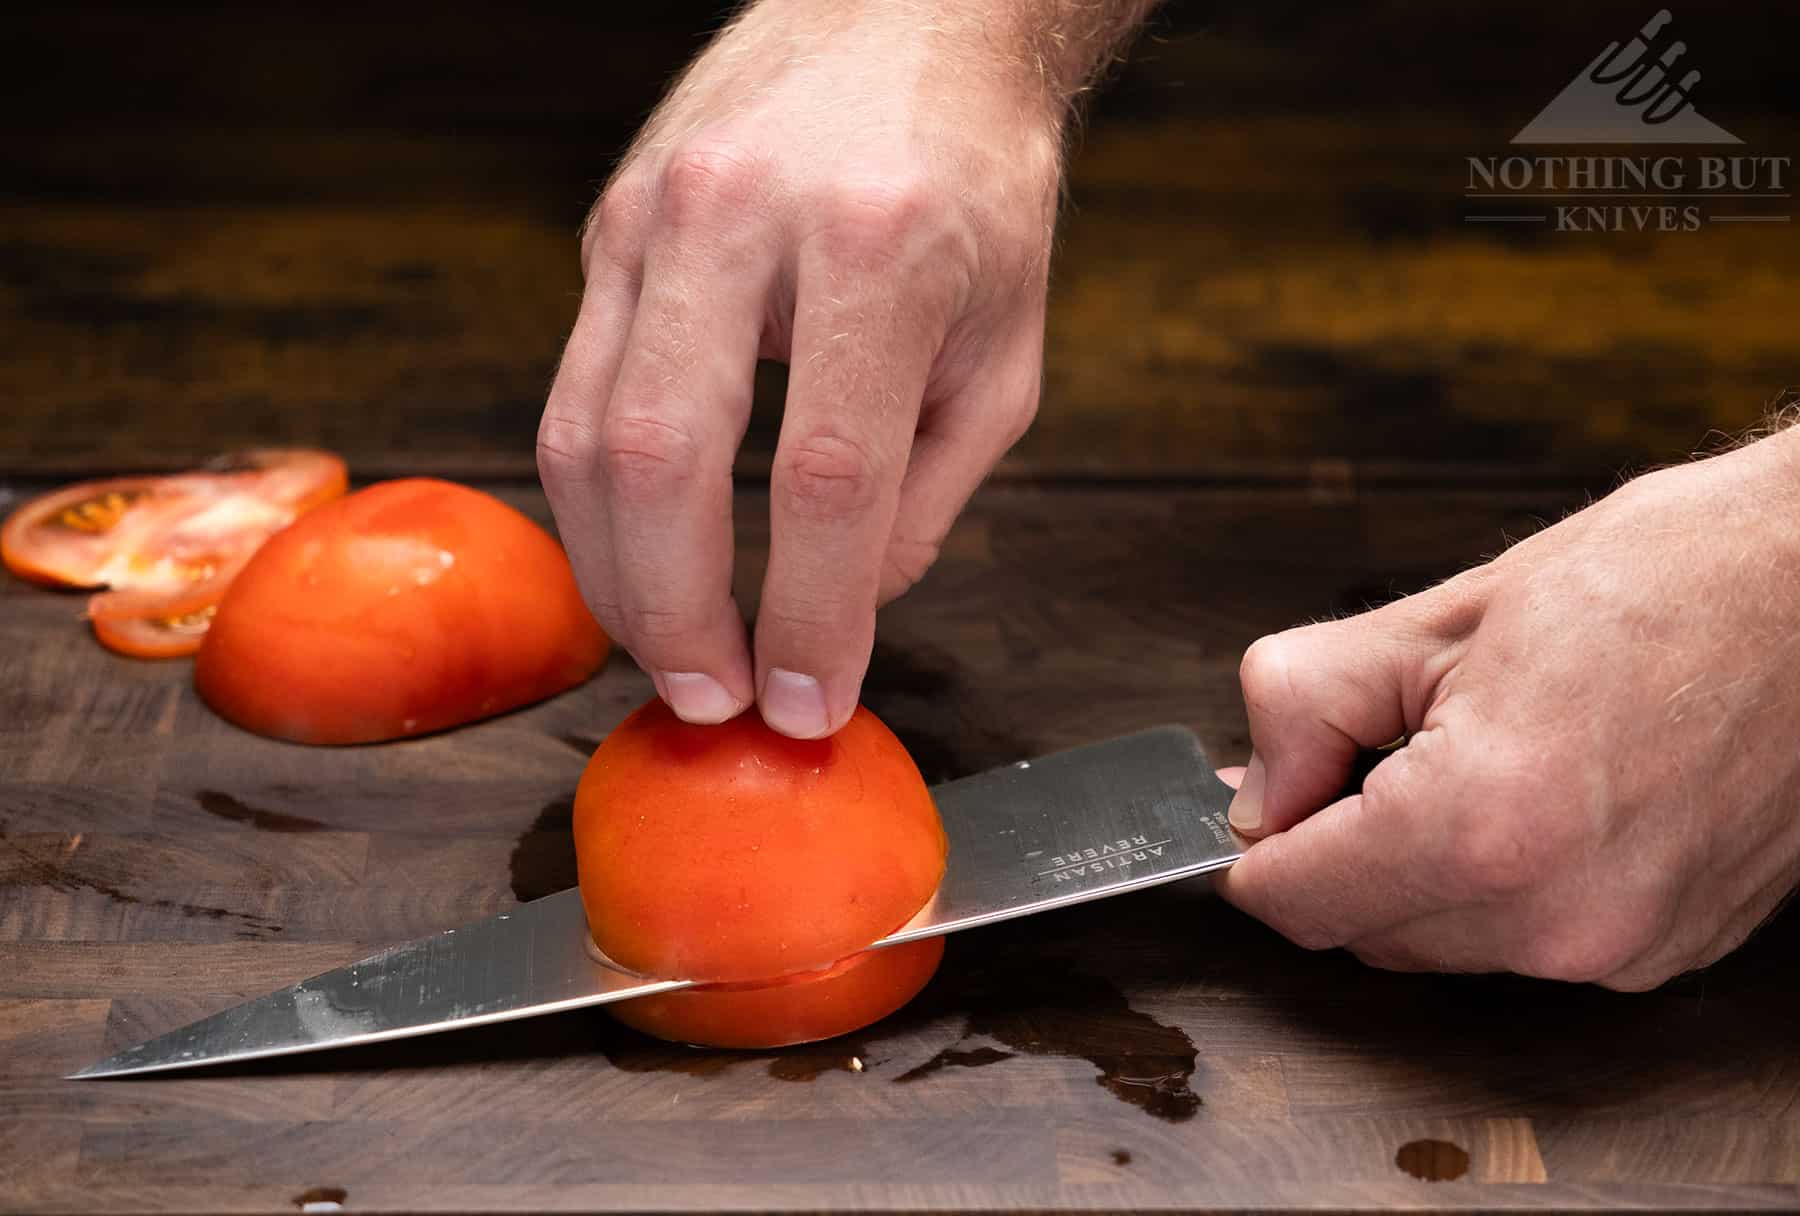 This is a French-style chef’s knife, so it’s meant to be thin with a delicate tip that can make exact insertions and cuts.